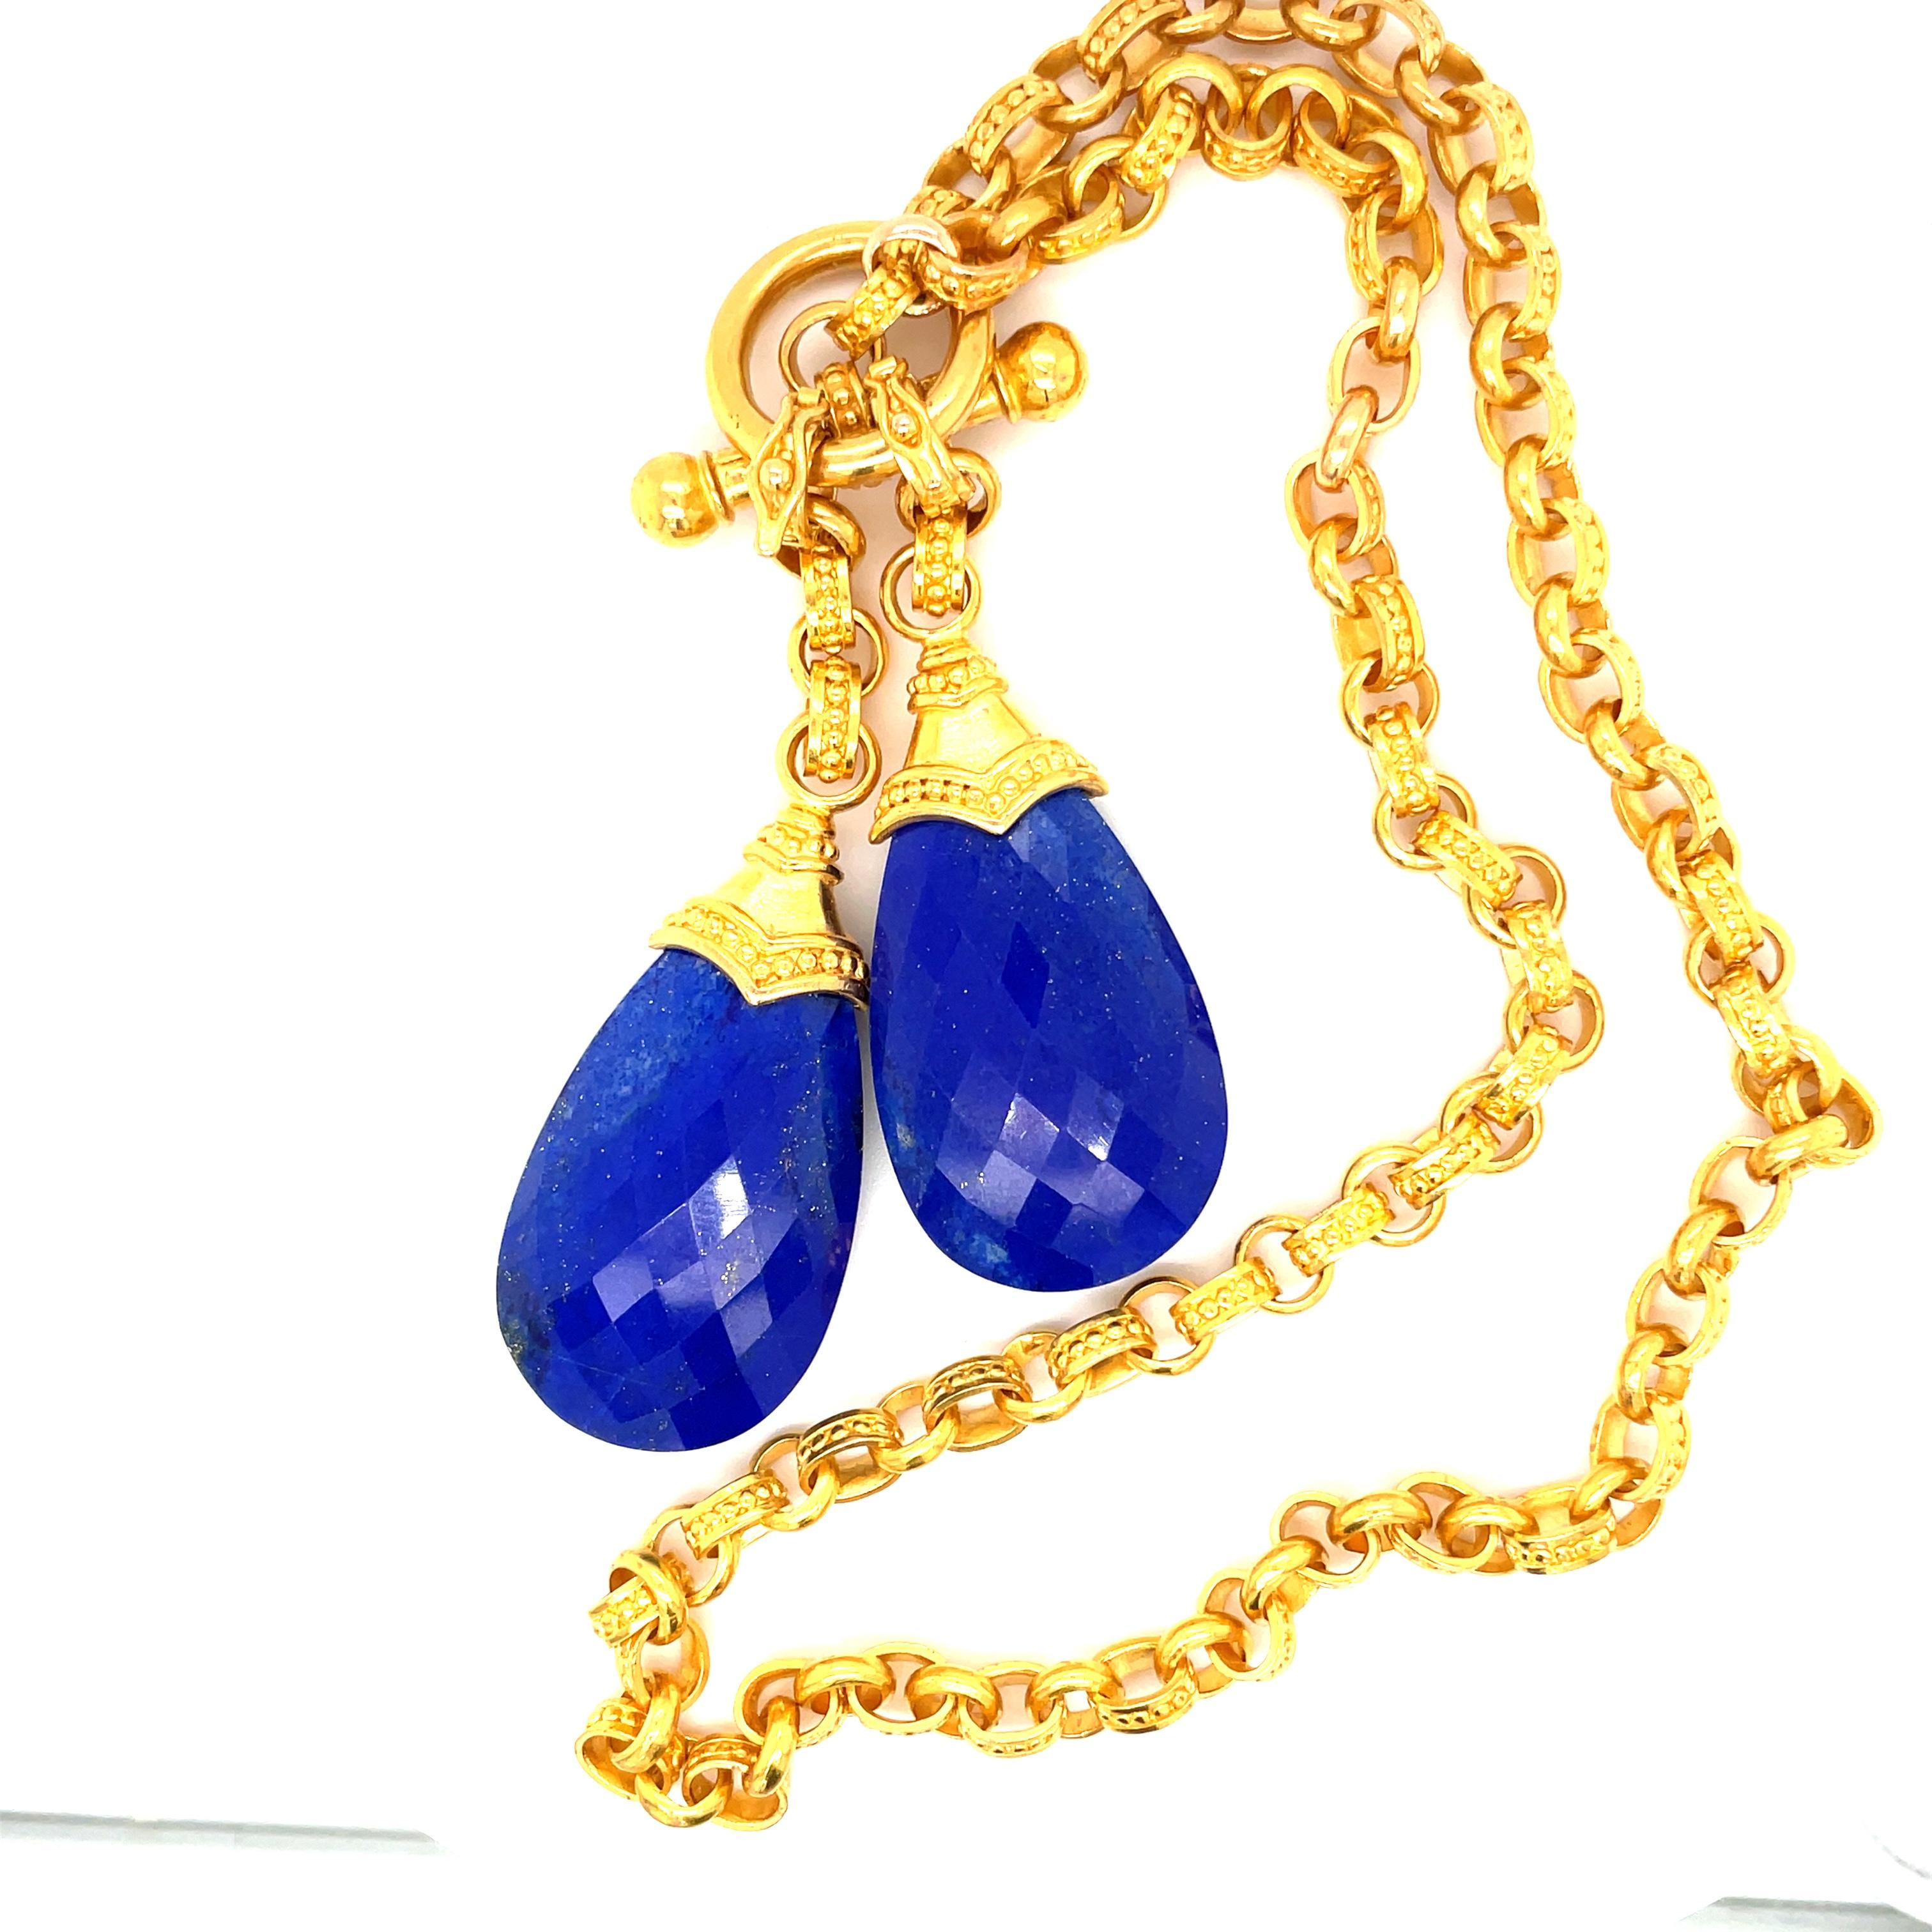 Carolyn Tyler Lapis and Gold Link Necklace.  18K Yellow Gold chain with granulation that is Carolyn's signature!  18 Inches long this necklace is a stunner and the lapis charms can be removed and chain worn alone. 
Stamped with C. Tyler, 18K,